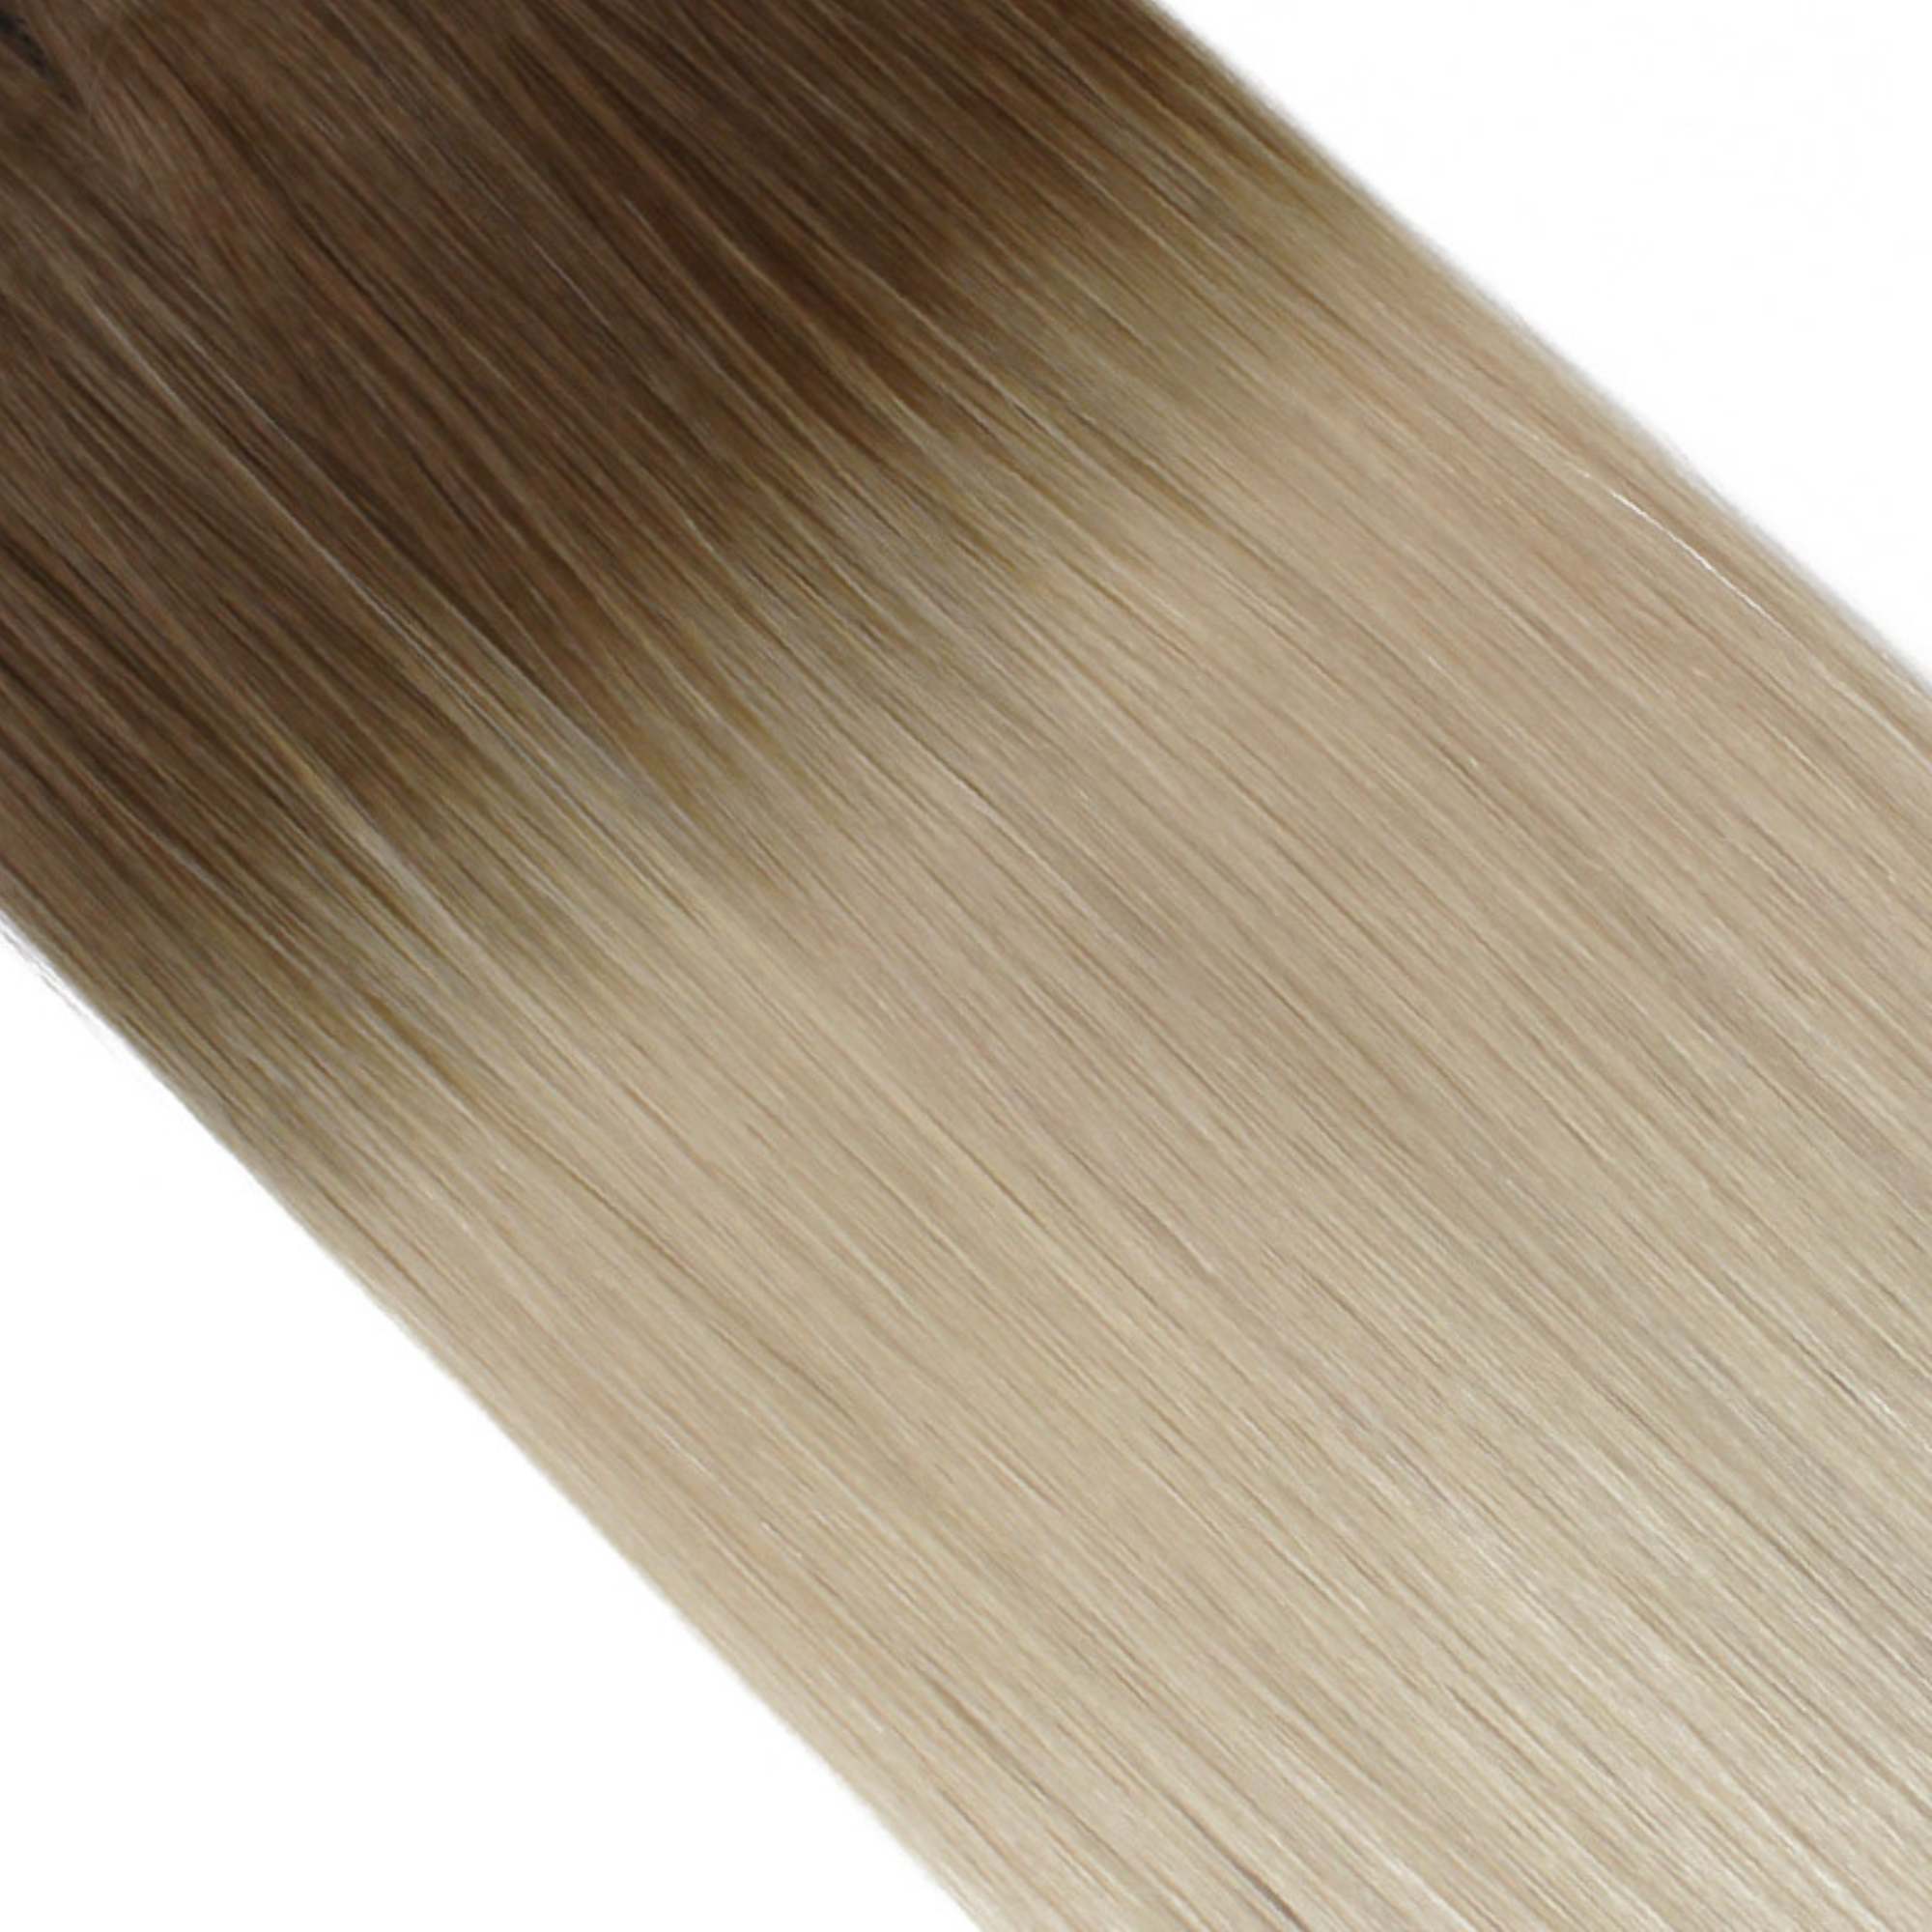 "hair rehab london 14" weft hair extensions shade swatch titled rooted blonde af"